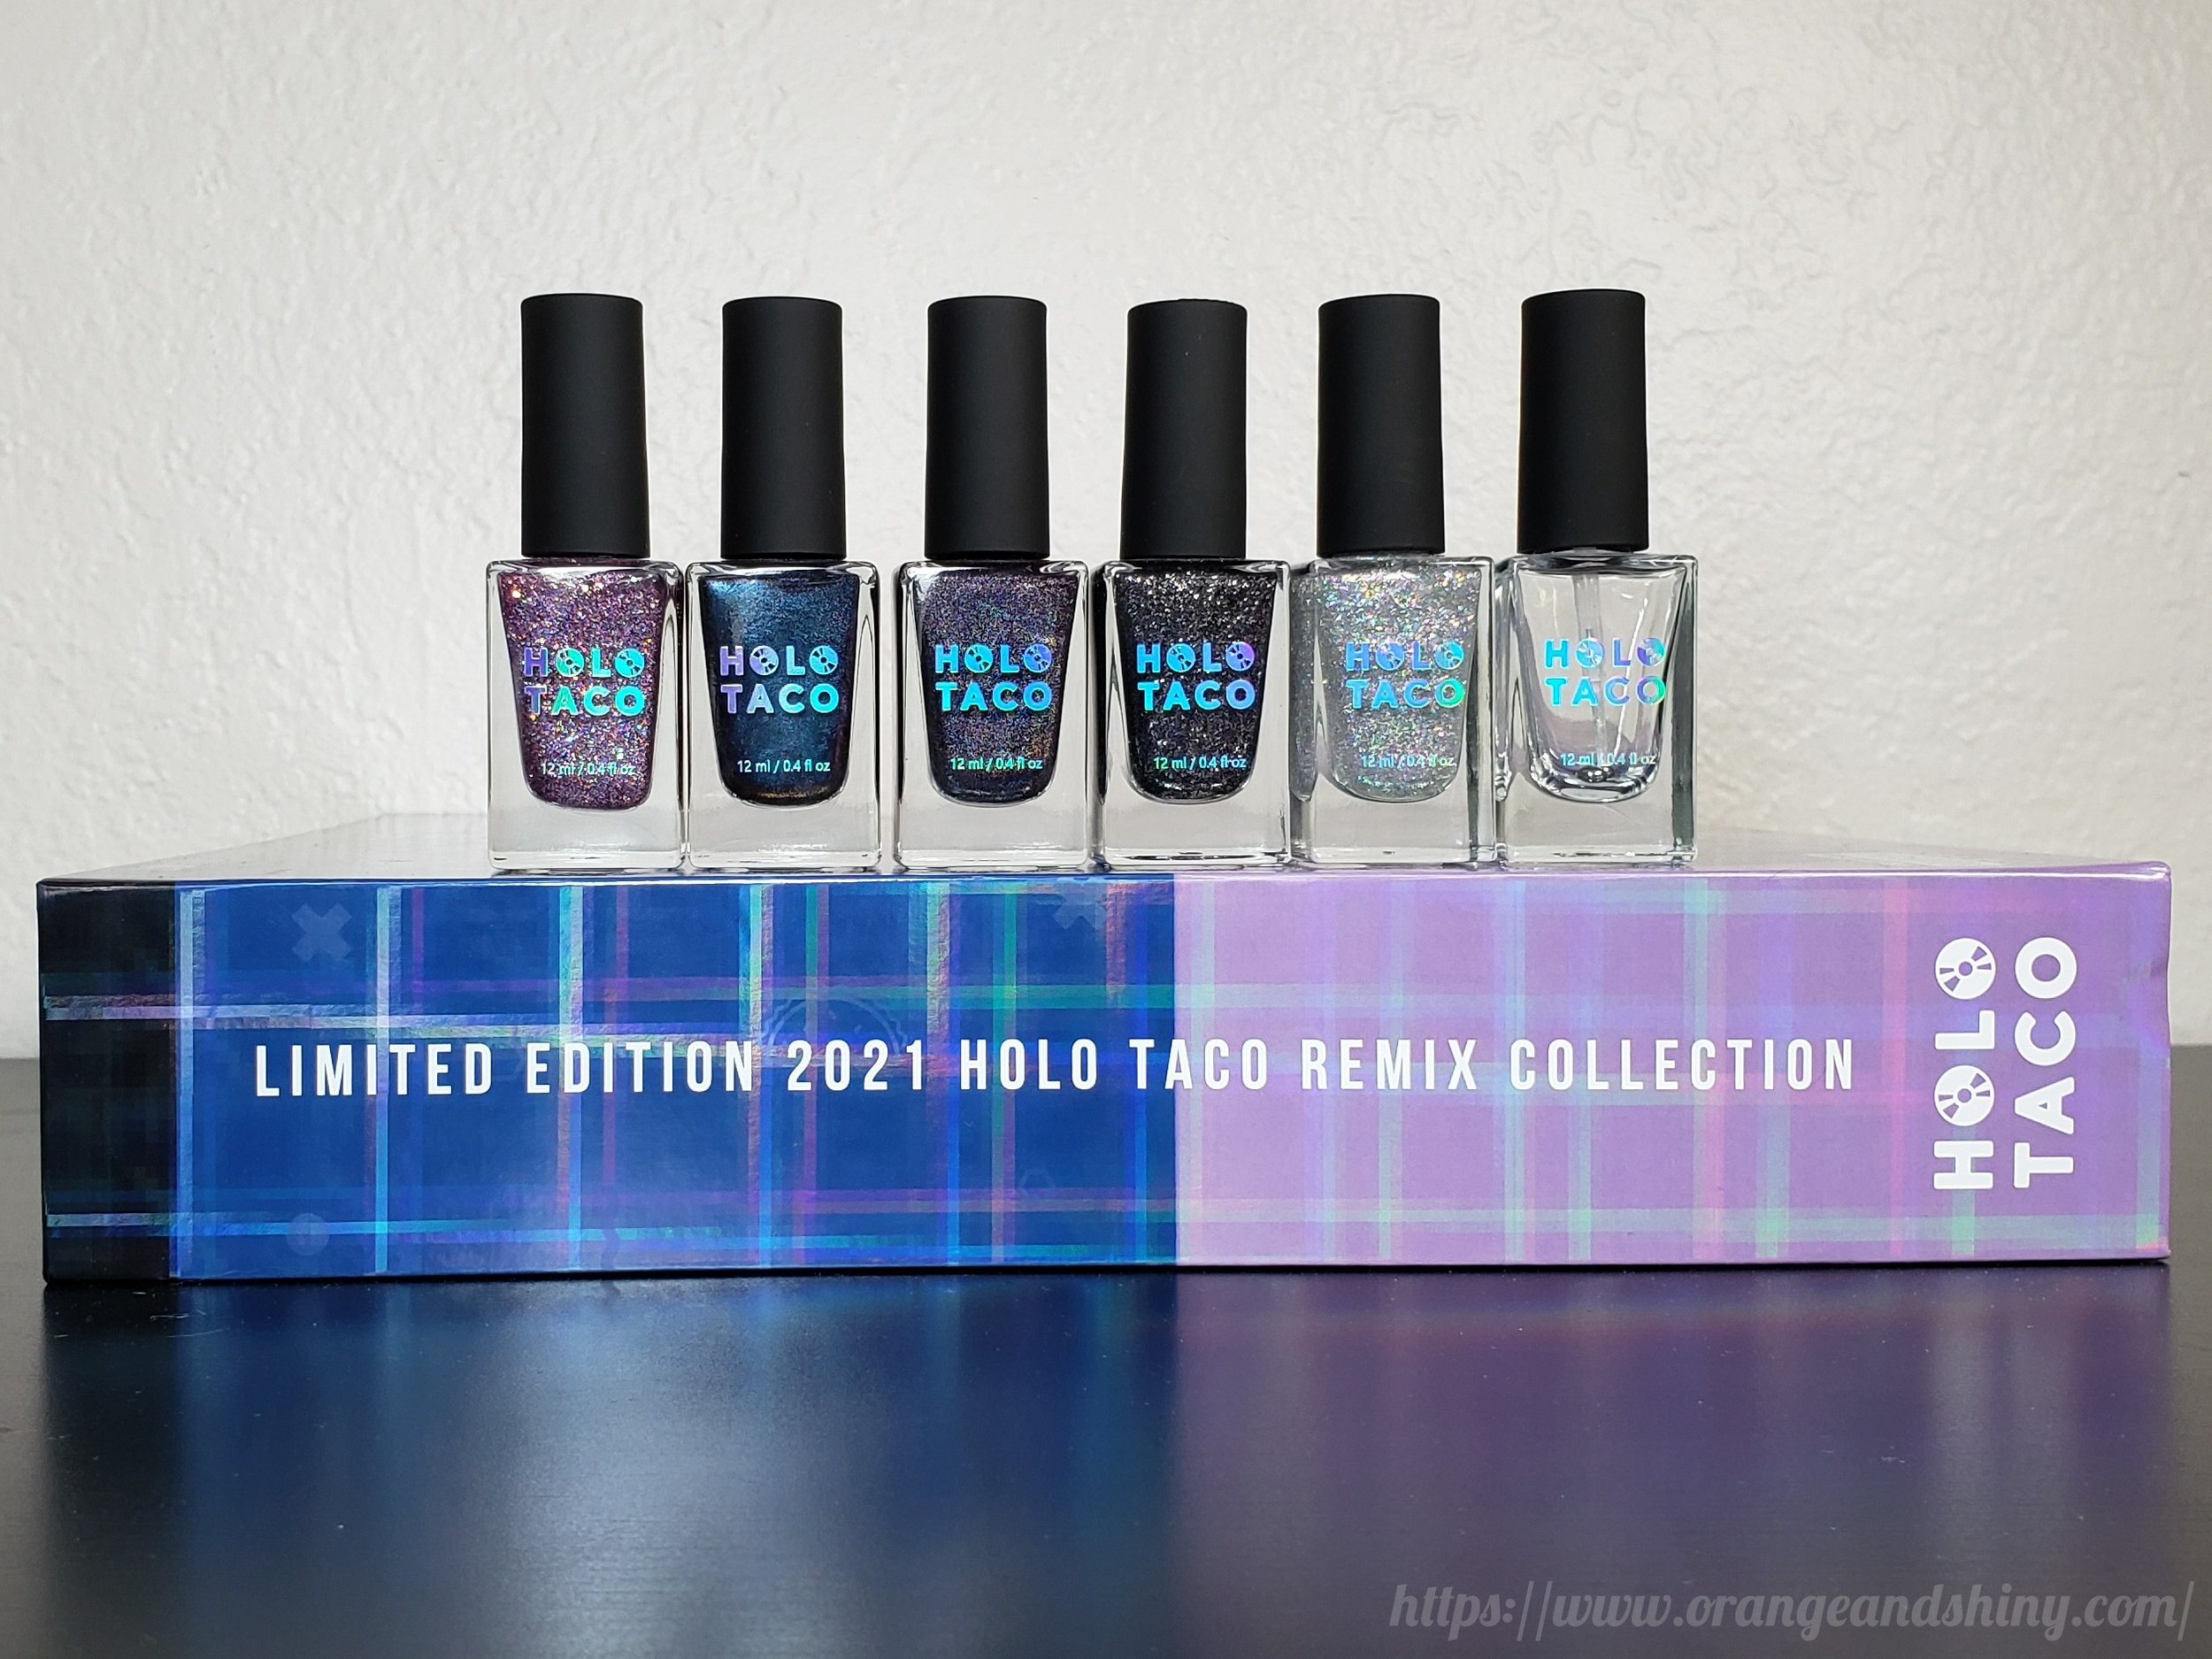 20210821 - Holo Taco Remix Collection Polishes.jpg